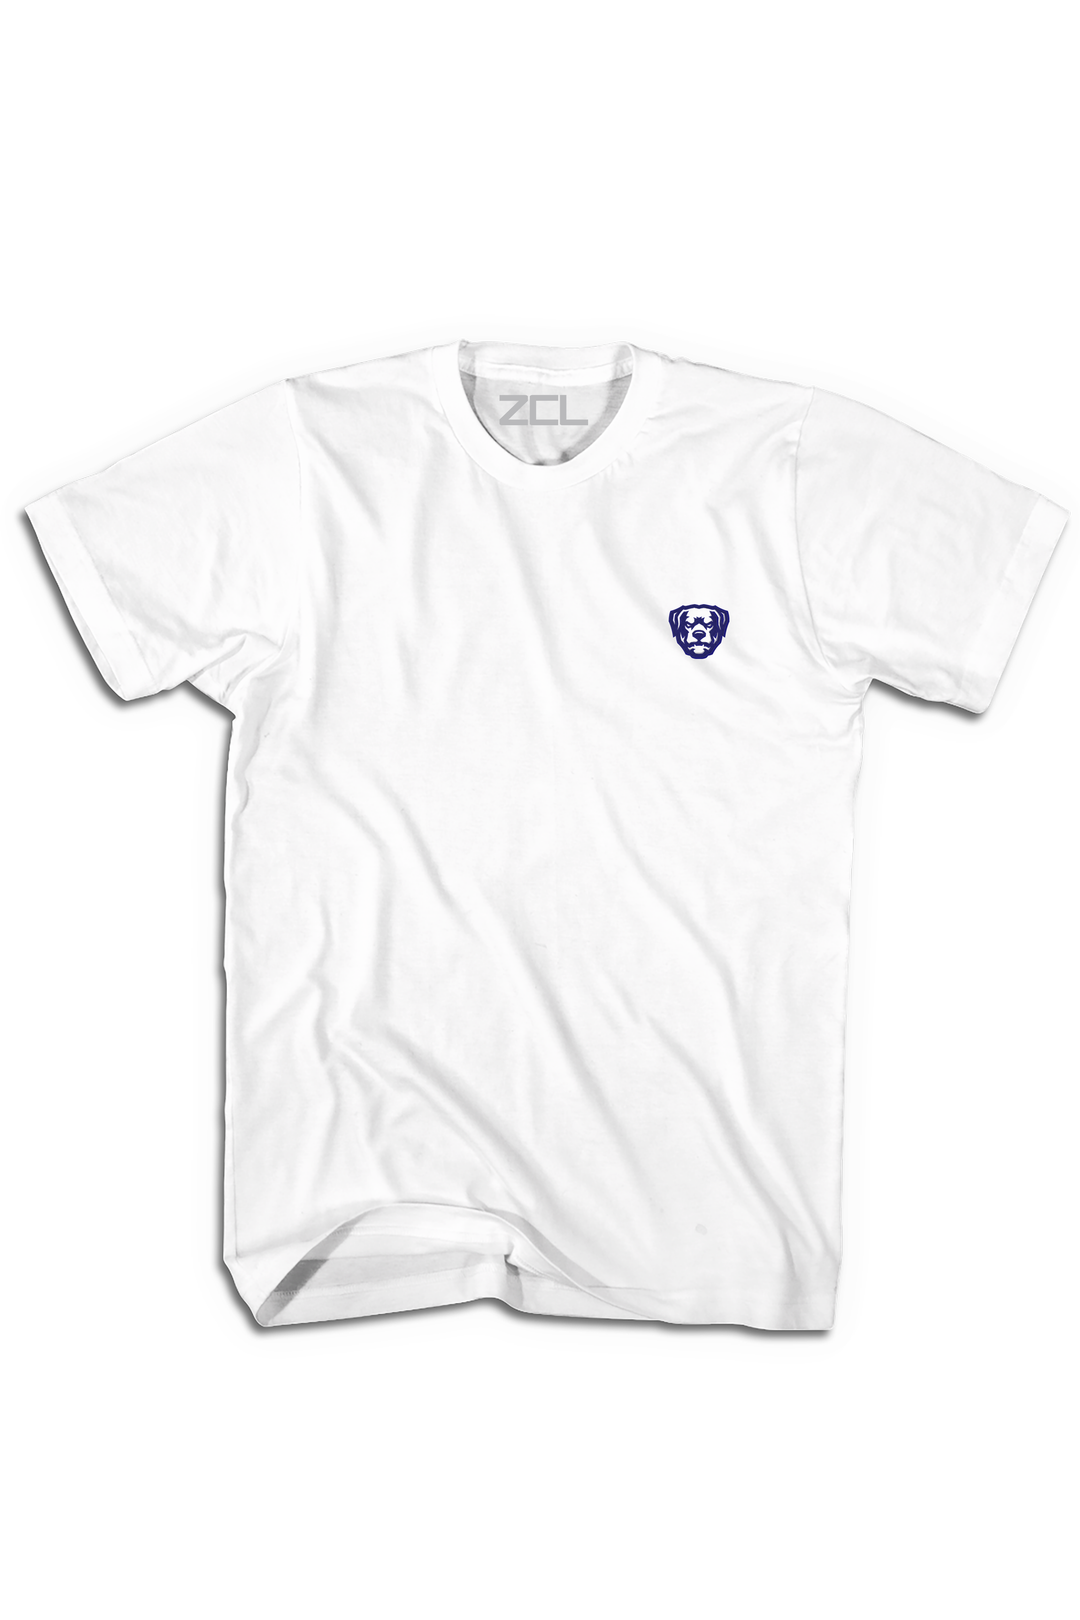 Embroidered ZCL Logo Tee White - Navy - Zamage